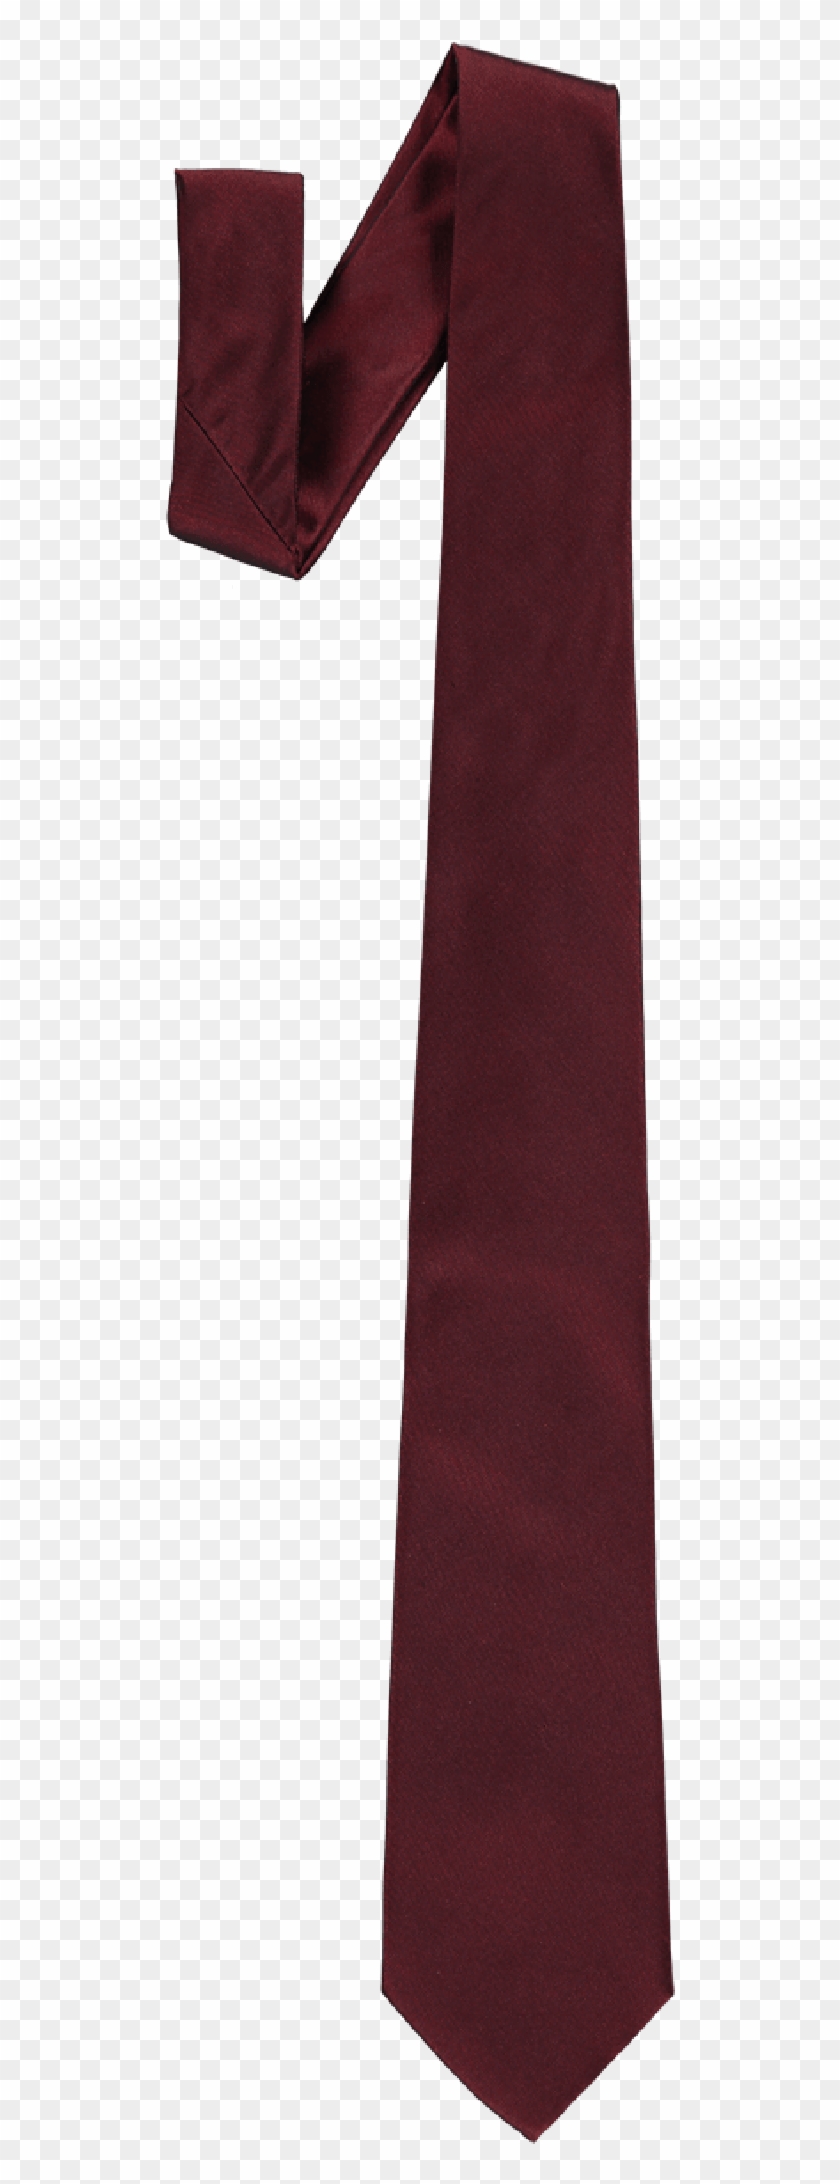 Red tie PNG image transparent image download, size: 207x964px